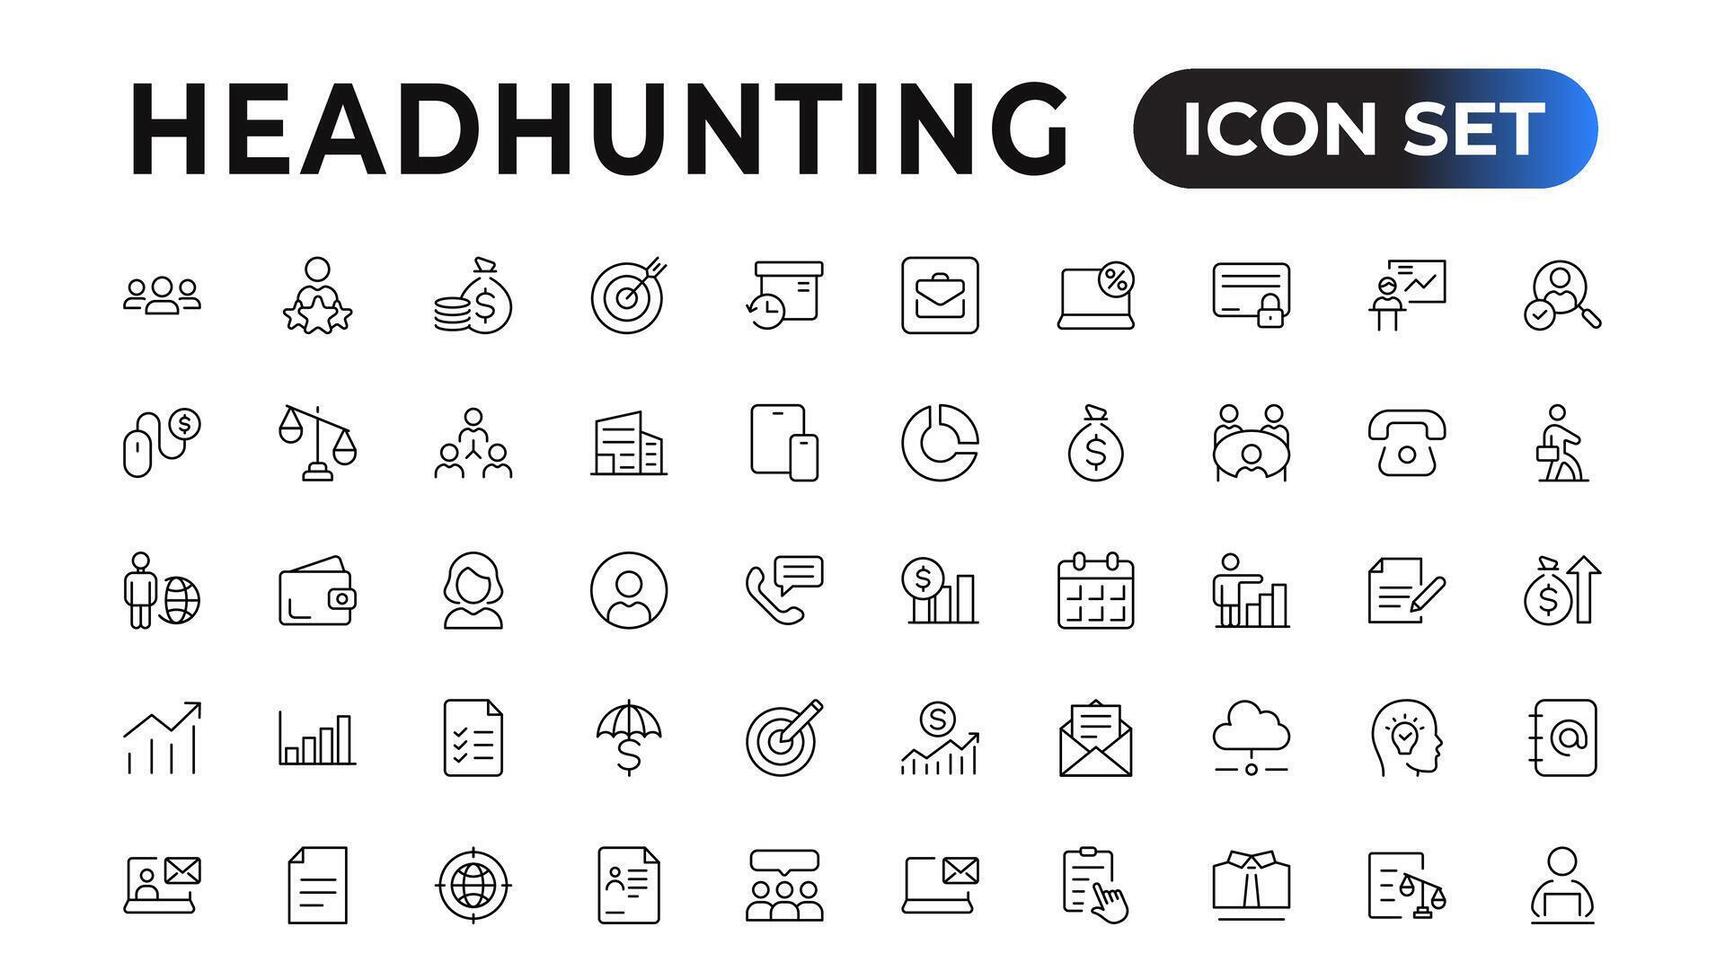 Headhunting icon set. Recruitment icon set Included the icons as Job Interview, Career Path, Resume, Job hiring, Candidate and Human resource icons. Vector illustration.